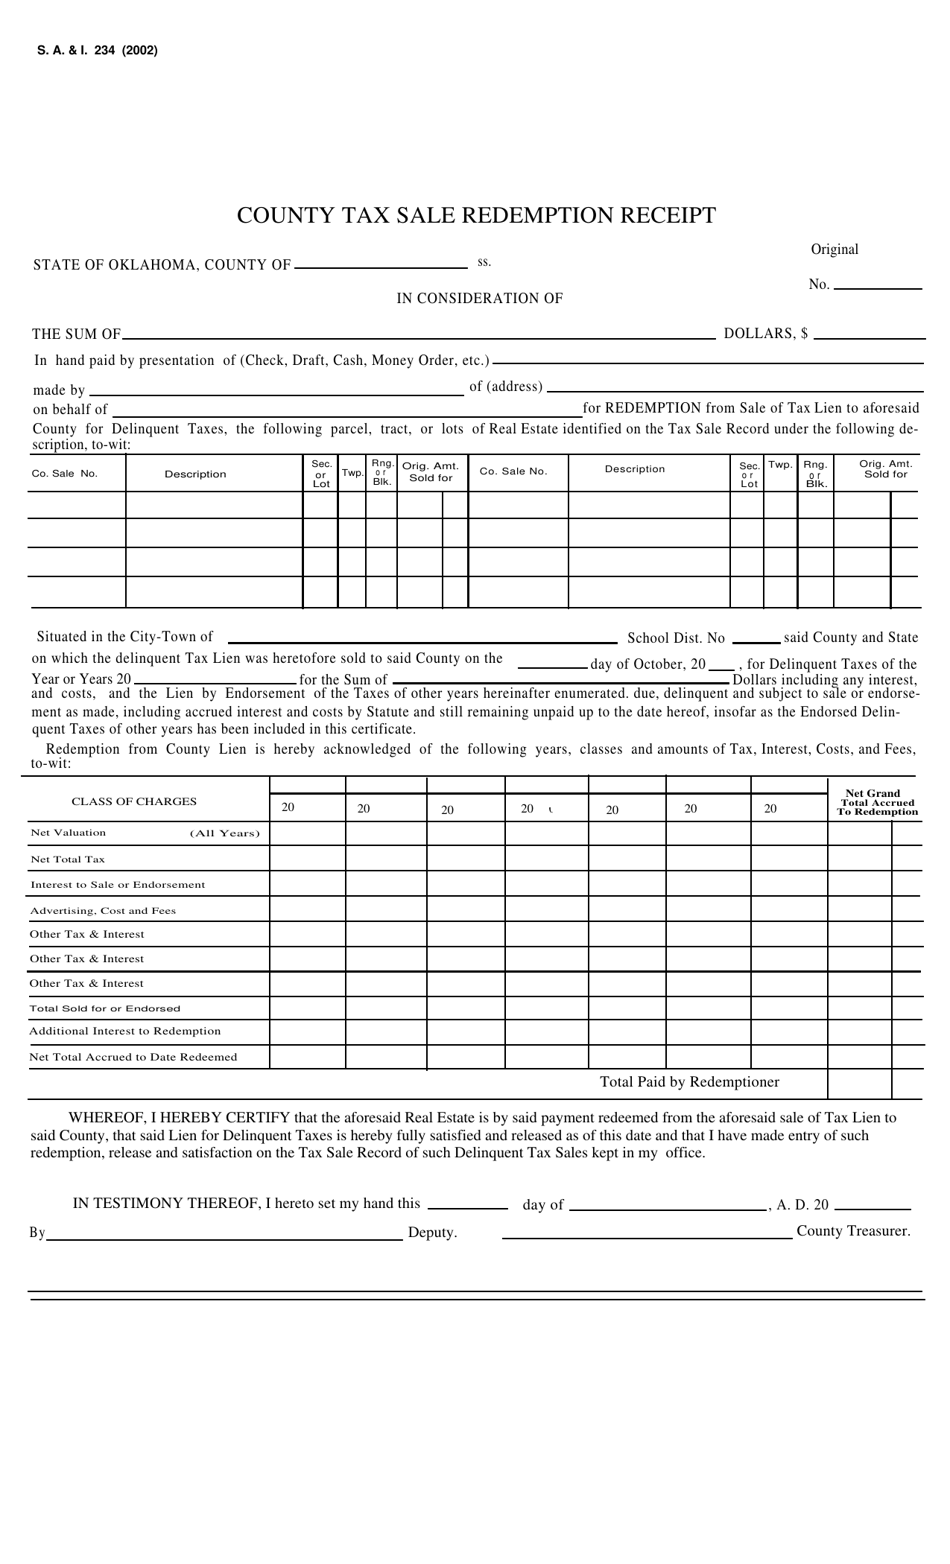 Form S.A. I.234 County Tax Sale Redemption Receipt - Oklahoma, Page 1